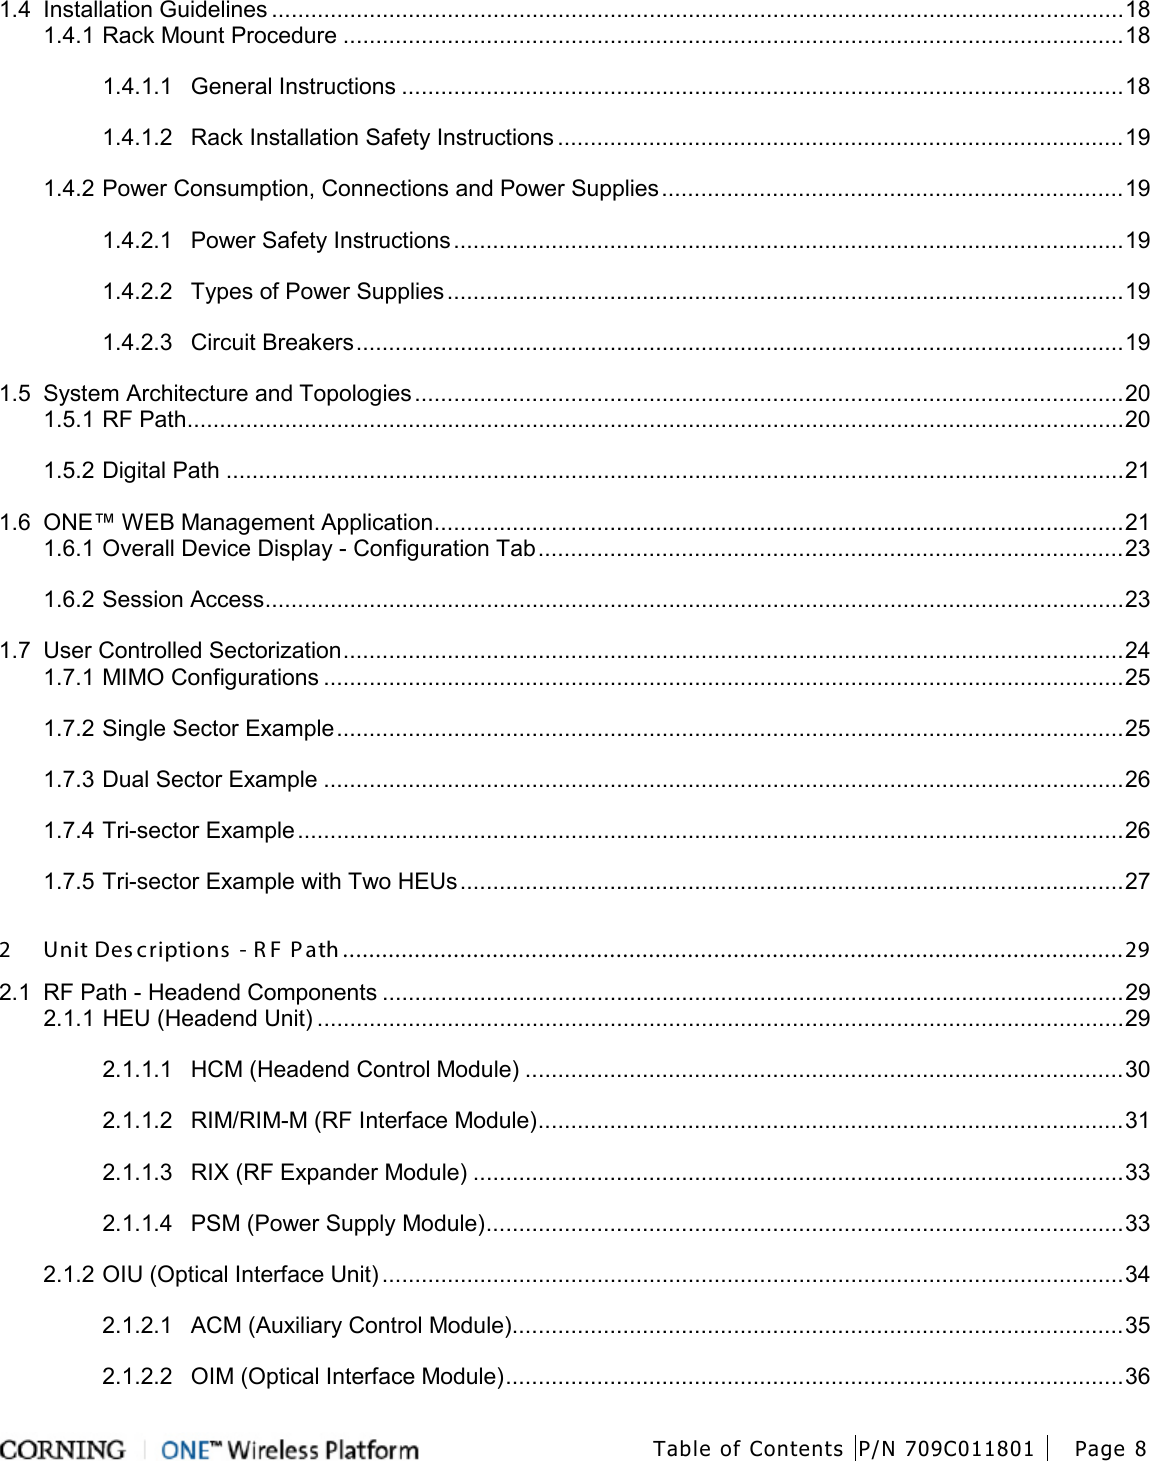  Table of Contents P/N 709C011801 Page 8   1.4 Installation Guidelines ................................................................................................................................... 18 1.4.1 Rack Mount Procedure ........................................................................................................................ 18 1.4.1.1 General Instructions ............................................................................................................... 18 1.4.1.2 Rack Installation Safety Instructions ....................................................................................... 19 1.4.2 Power Consumption, Connections and Power Supplies ....................................................................... 19 1.4.2.1 Power Safety Instructions ....................................................................................................... 19 1.4.2.2 Types of Power Supplies ........................................................................................................ 19 1.4.2.3 Circuit Breakers ...................................................................................................................... 19 1.5 System Architecture and Topologies ............................................................................................................. 20 1.5.1 RF Path ................................................................................................................................................ 20 1.5.2 Digital Path .......................................................................................................................................... 21 1.6 ONE™ WEB Management Application .......................................................................................................... 21 1.6.1 Overall Device Display - Configuration Tab .......................................................................................... 23 1.6.2 Session Access .................................................................................................................................... 23 1.7 User Controlled Sectorization ........................................................................................................................ 24 1.7.1 MIMO Configurations ........................................................................................................................... 25 1.7.2 Single Sector Example ......................................................................................................................... 25 1.7.3 Dual Sector Example ........................................................................................................................... 26 1.7.4 Tri-sector Example ............................................................................................................................... 26 1.7.5 Tri-sector Example with Two HEUs ...................................................................................................... 27 2 Unit Des criptions  - R F  P ath ........................................................................................................................ 29 2.1 RF Path - Headend Components .................................................................................................................. 29 2.1.1 HEU (Headend Unit) ............................................................................................................................ 29 2.1.1.1 HCM (Headend Control Module) ............................................................................................ 30 2.1.1.2 RIM/RIM-M (RF Interface Module) .......................................................................................... 31 2.1.1.3 RIX (RF Expander Module) .................................................................................................... 33 2.1.1.4 PSM (Power Supply Module) .................................................................................................. 33 2.1.2 OIU (Optical Interface Unit) .................................................................................................................. 34 2.1.2.1 ACM (Auxiliary Control Module).............................................................................................. 35 2.1.2.2 OIM (Optical Interface Module) ............................................................................................... 36 